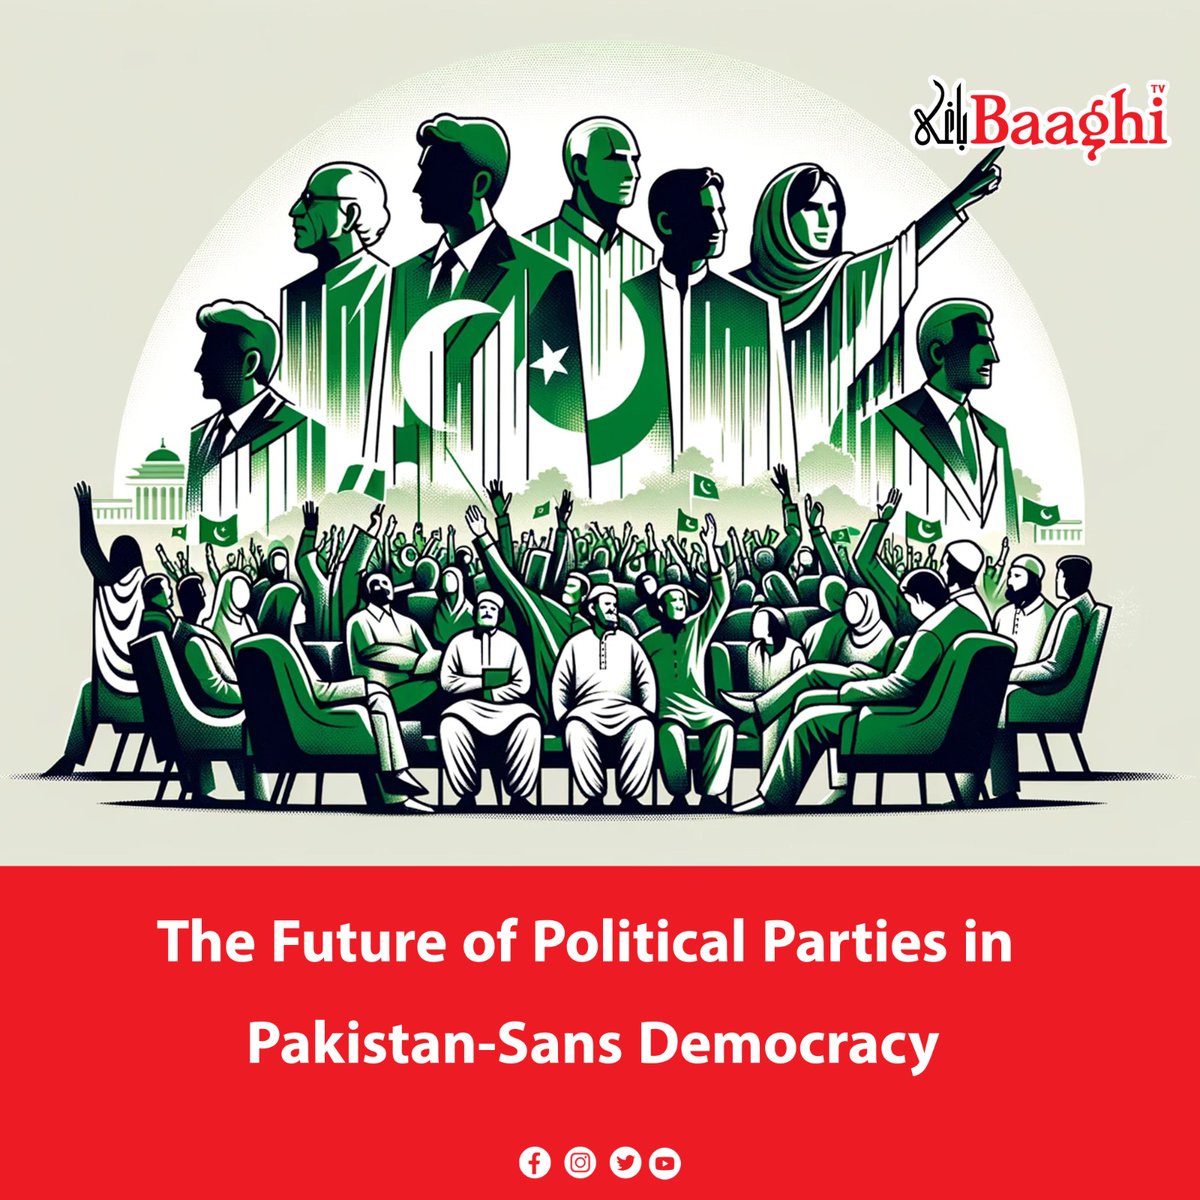 The Future of Political Parties in Pakistan-Sans Democracy

en.baaghitv.com/the-future-of-…

#BaaghiTV #Pakistan #Opinions #Politics #Democracy #PoliticalFuture